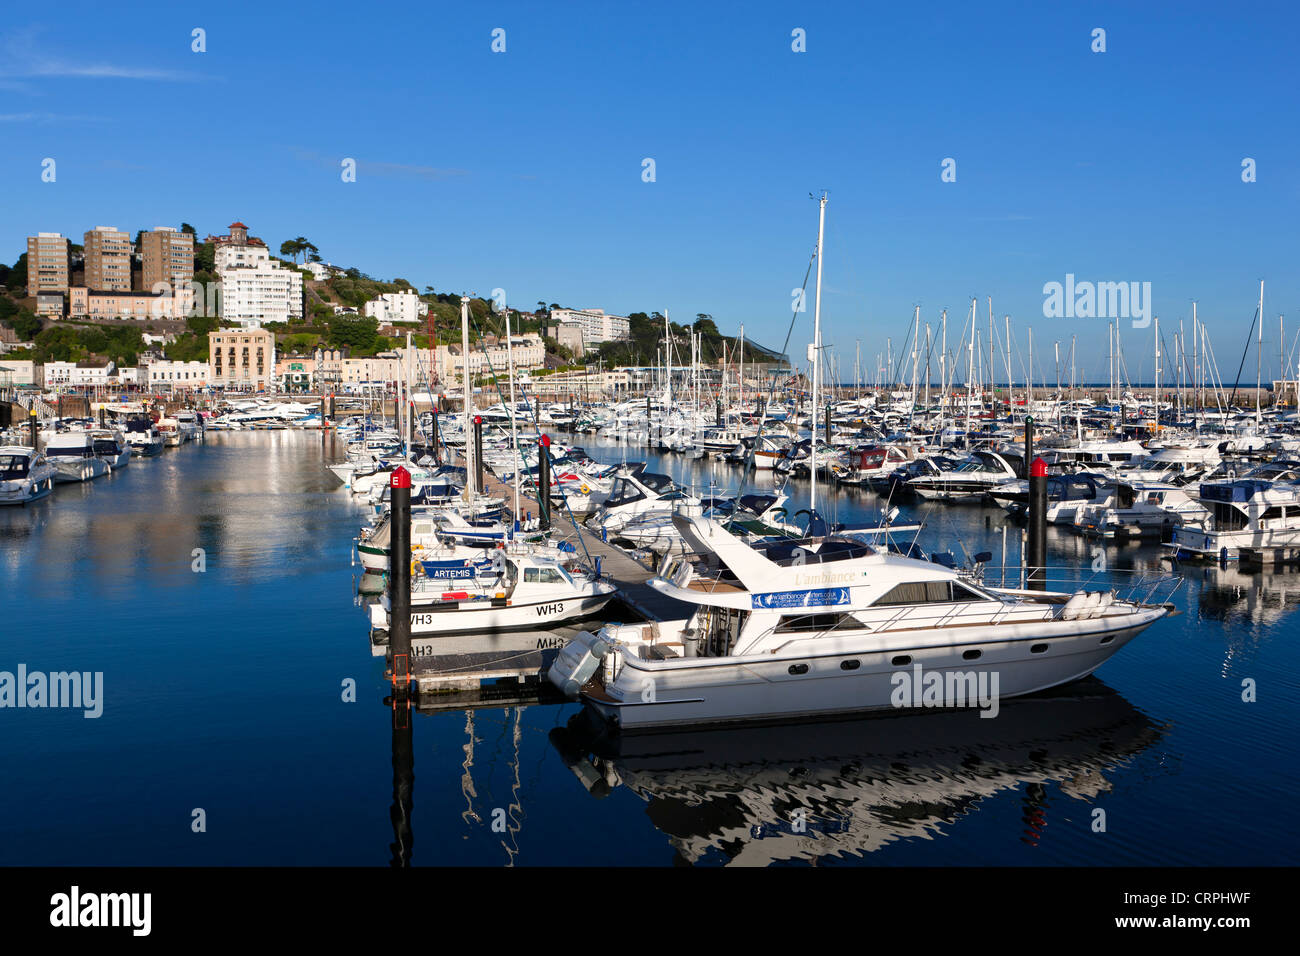 Boats moored in Torquay harbour on the North shore of Tor Bay. Stock Photo